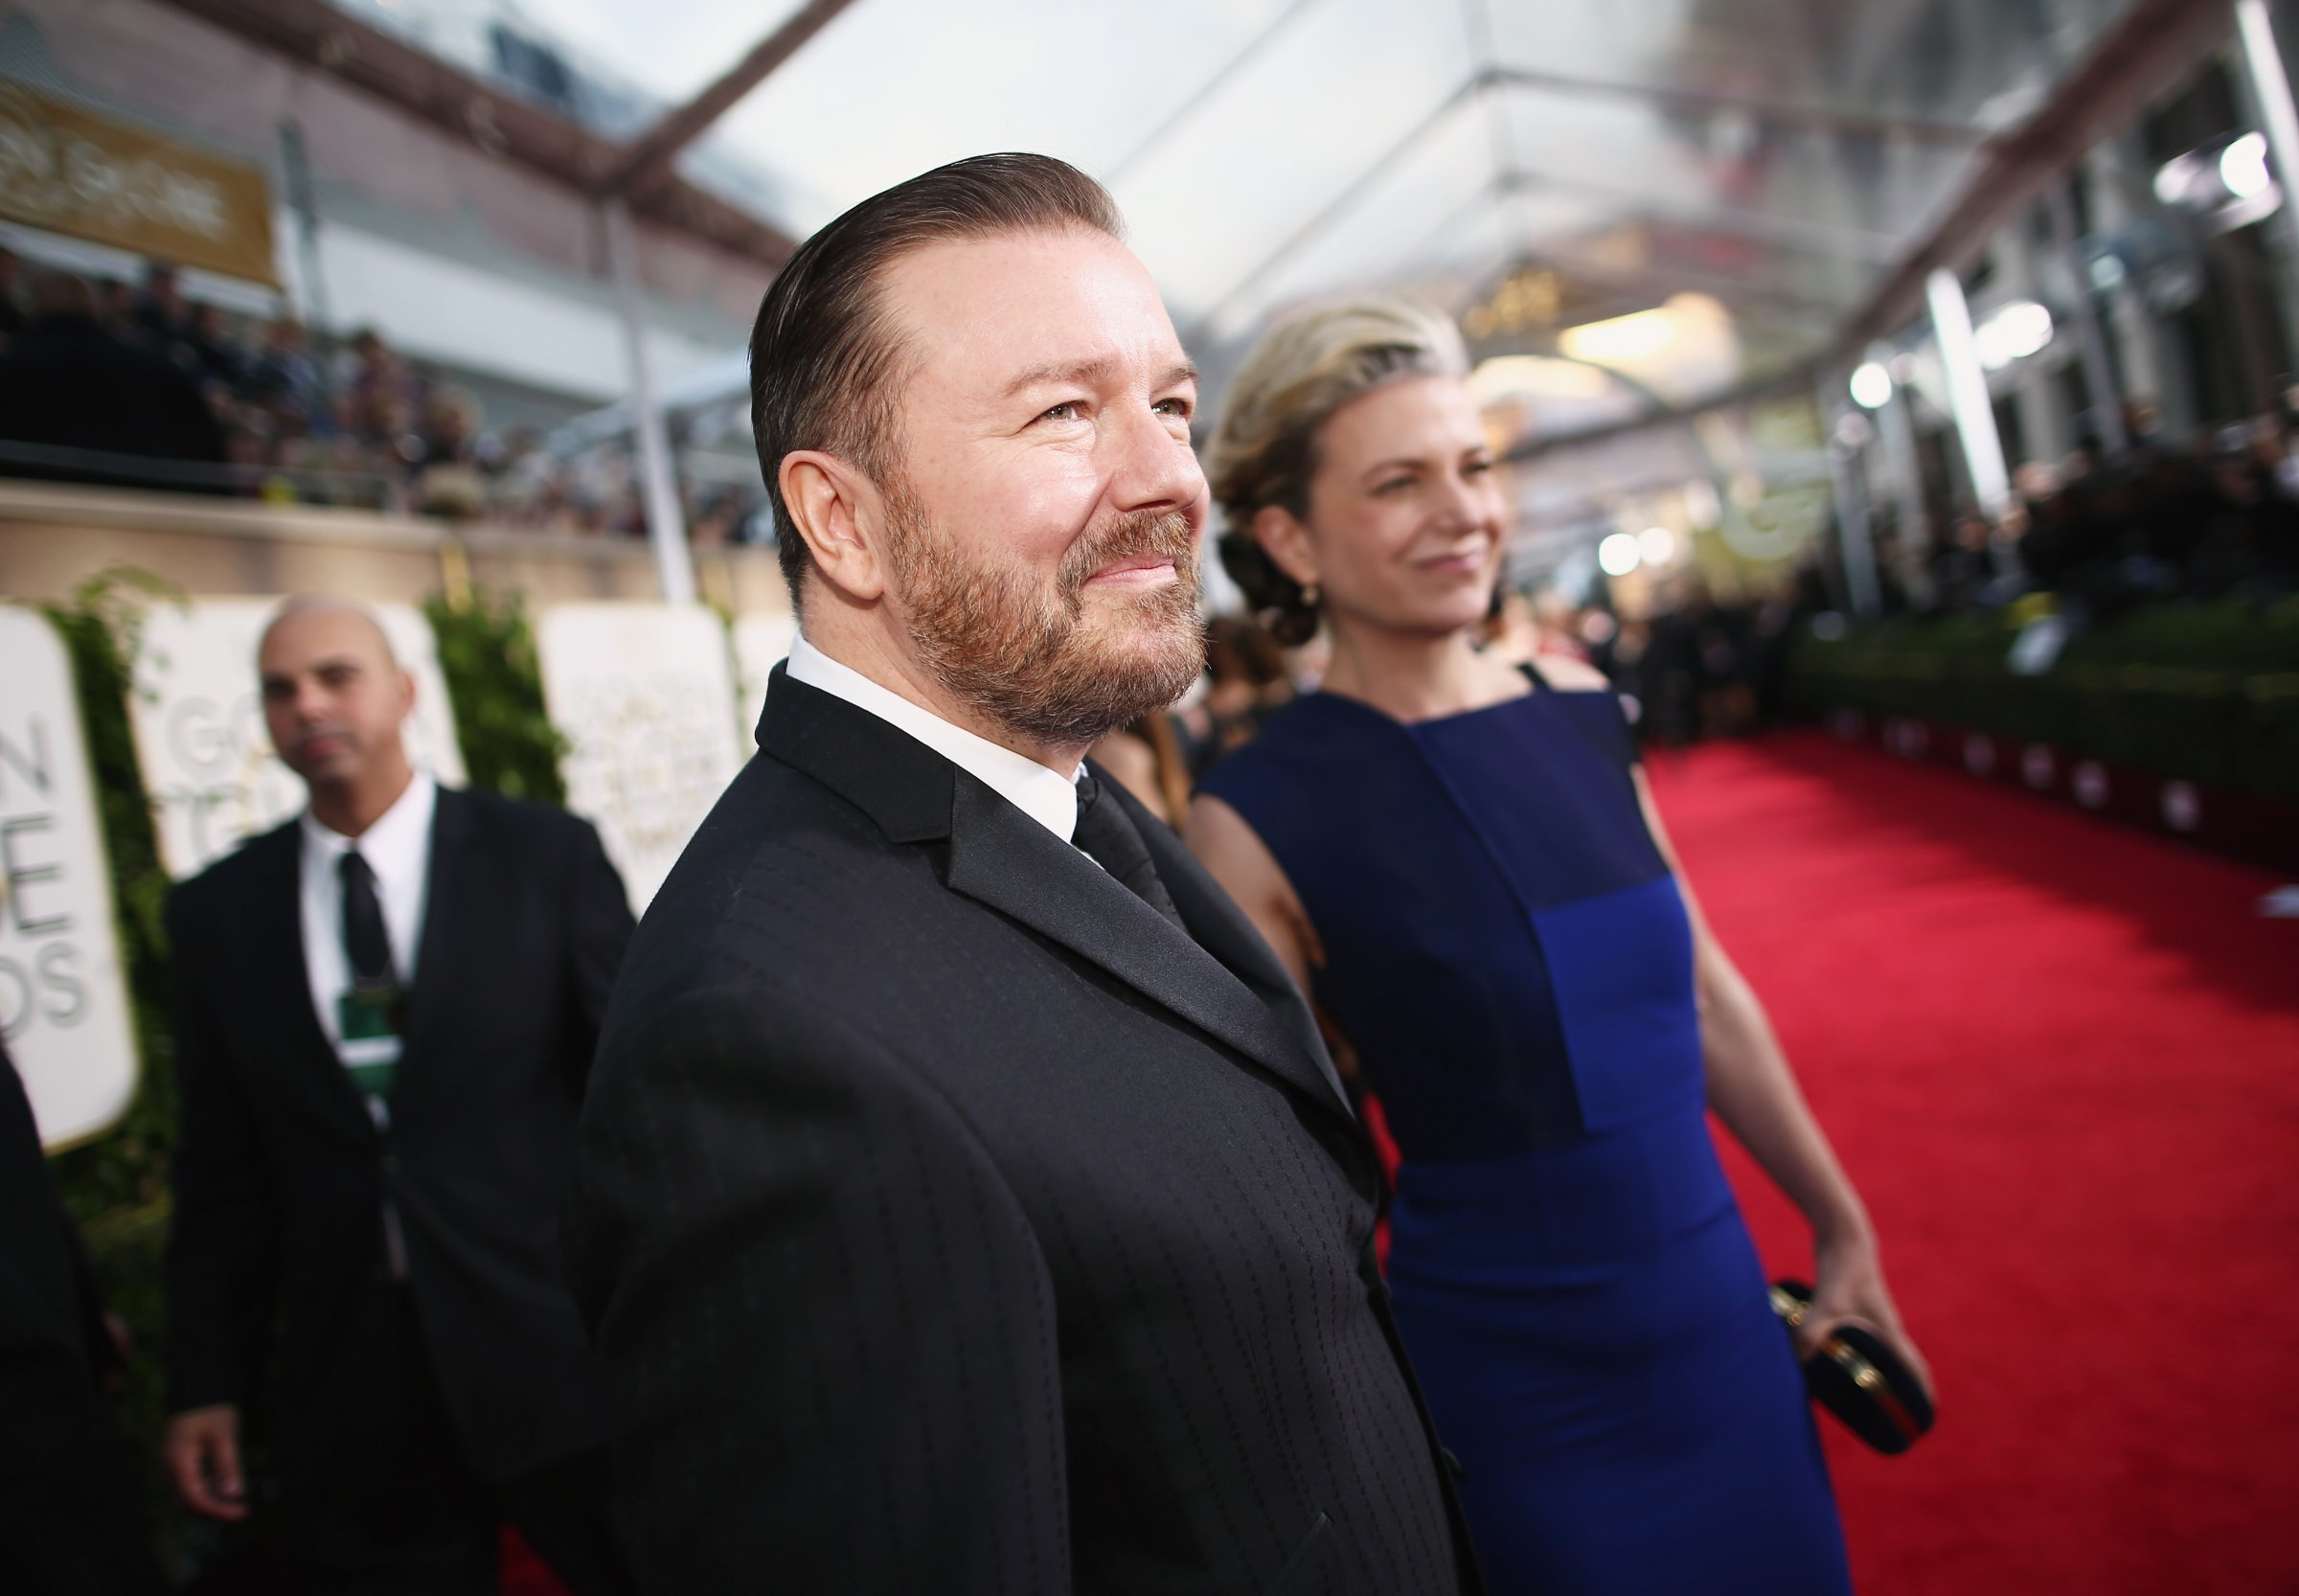 Ricky Gervais arriving at last year's 72nd Annual Golden Globe Awards held at the Beverly Hilton Hotel in Los Angeles on Jan. 11, 2015.